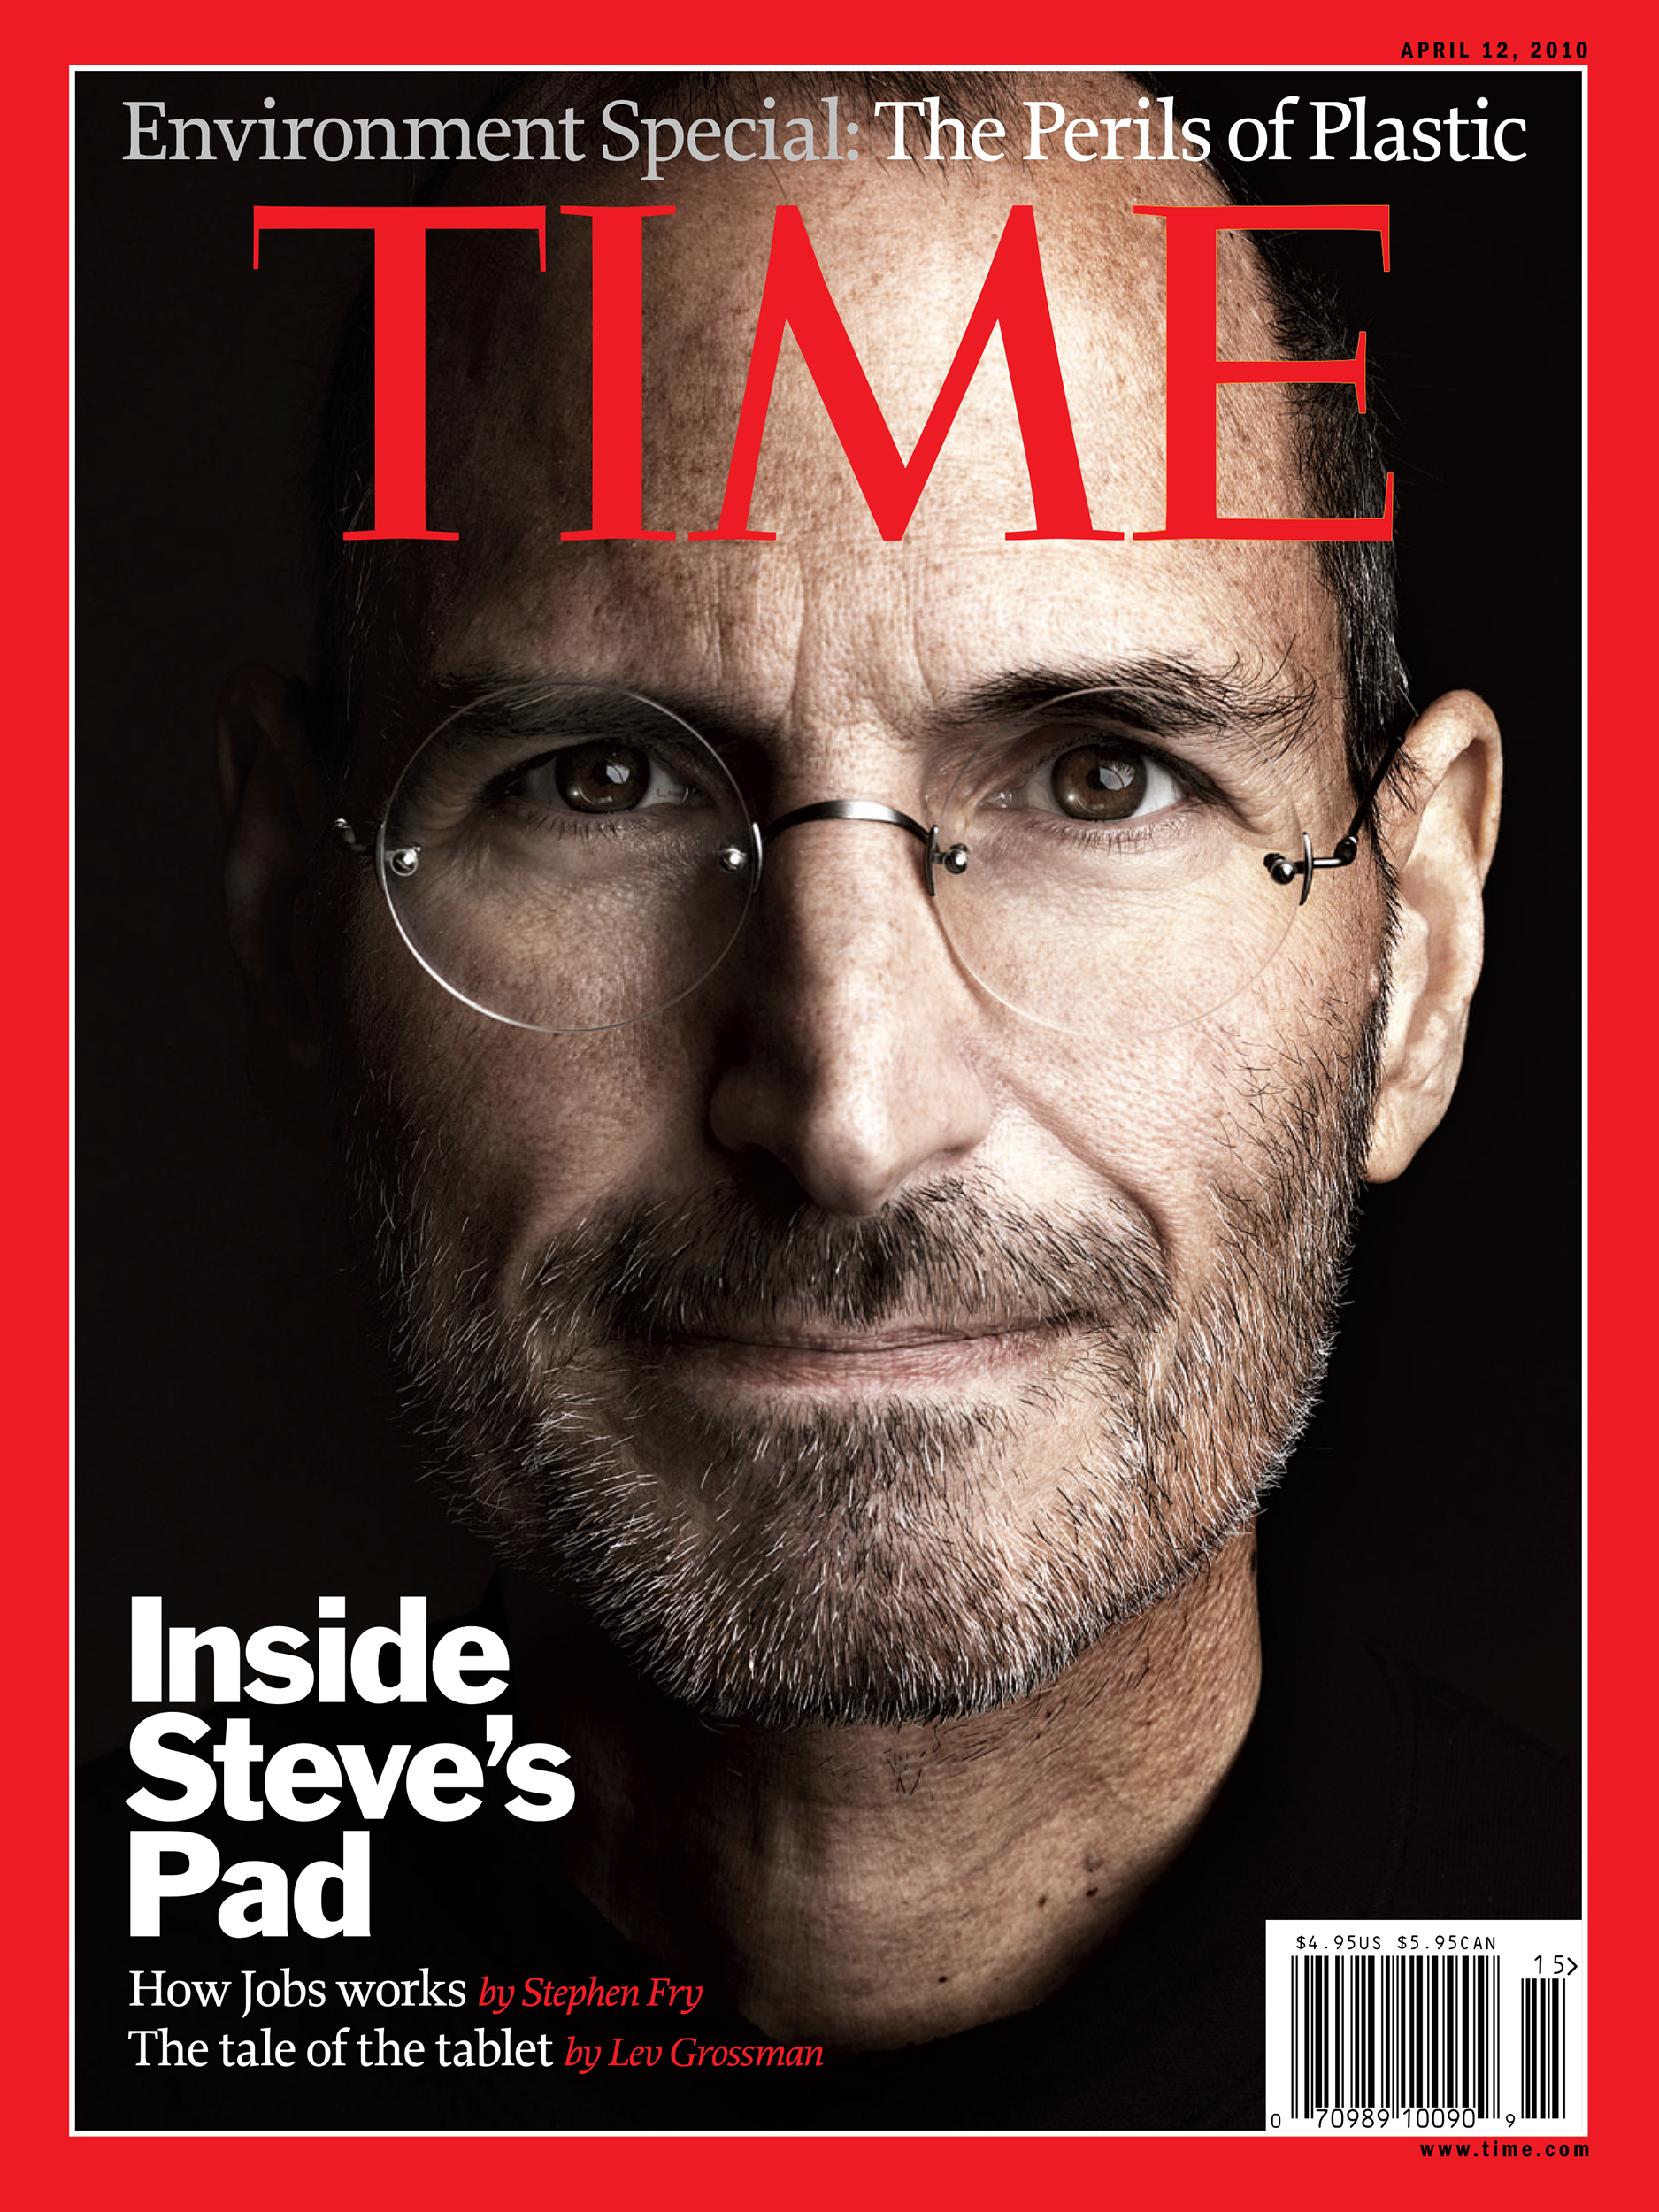 The  April 12, 2010 cover of TIME